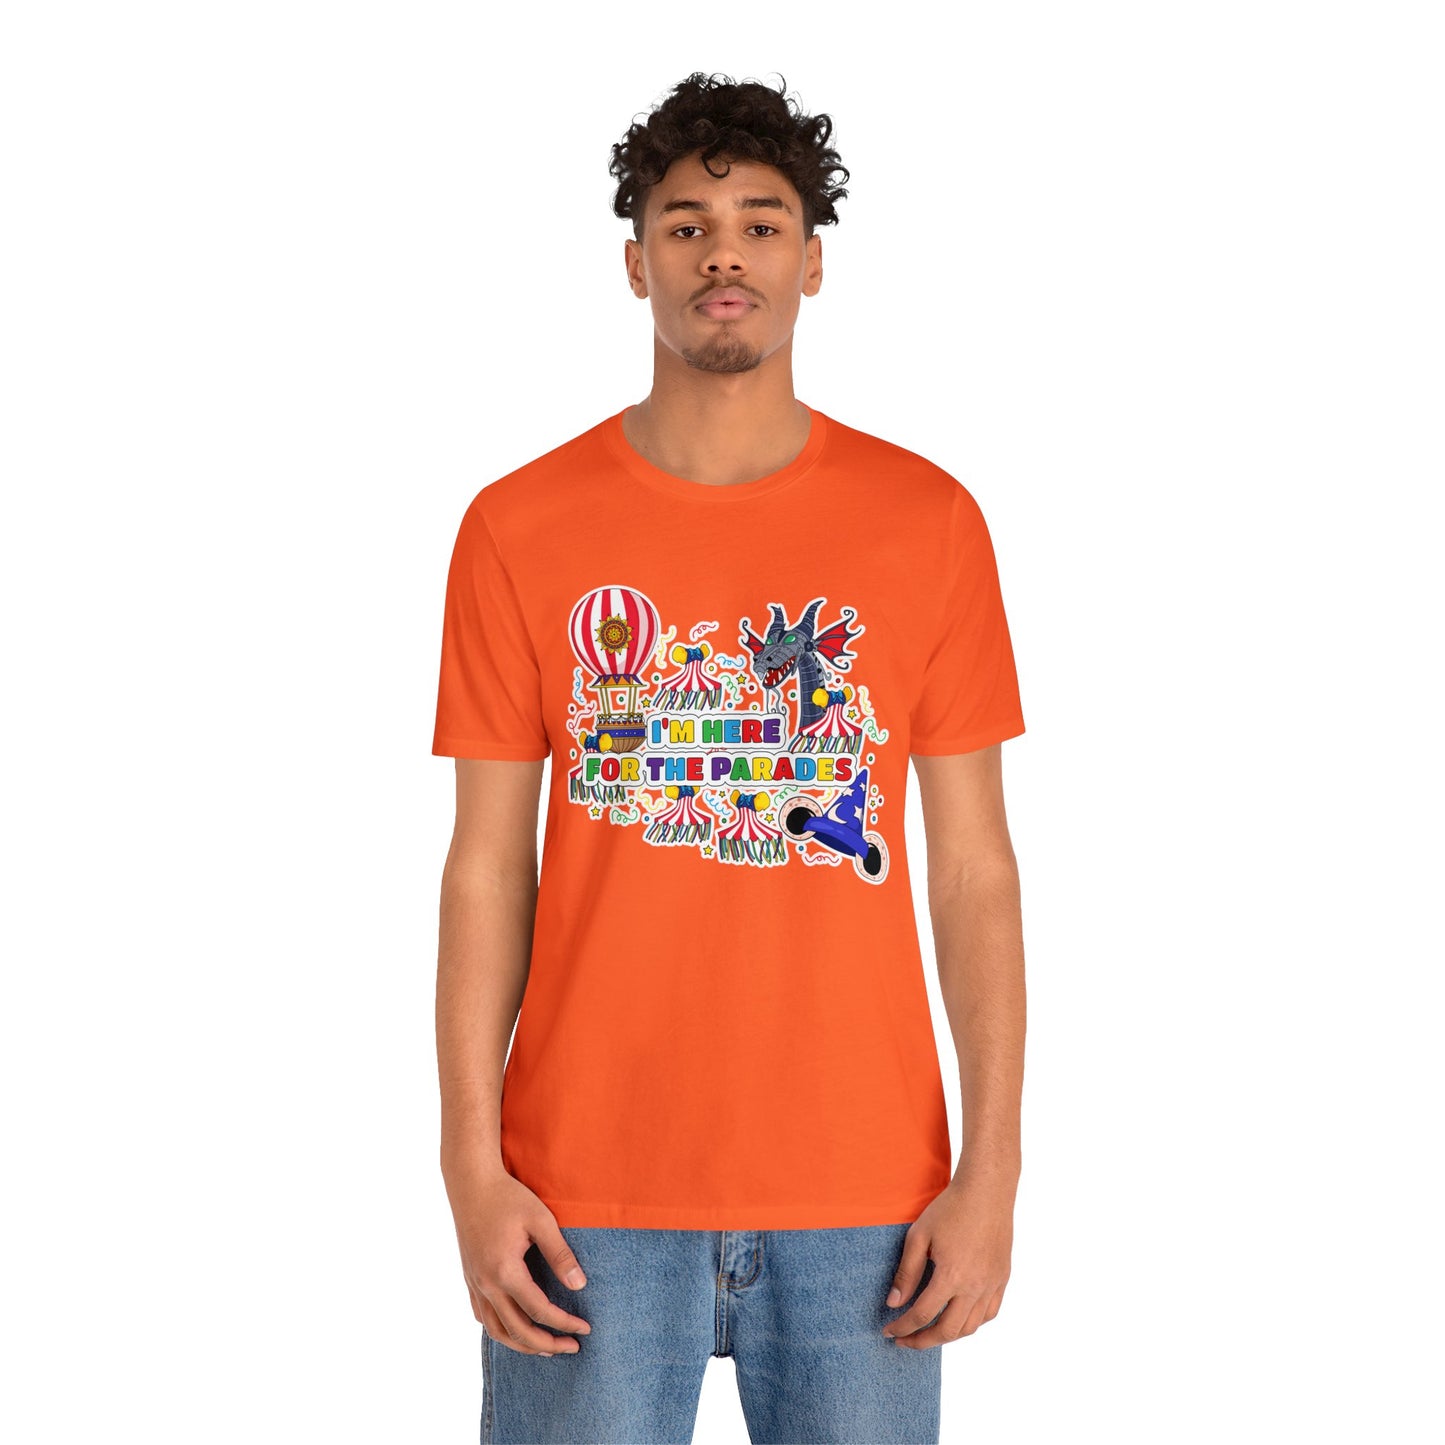 I'm Here For The Parades Unisex Graphic Tee